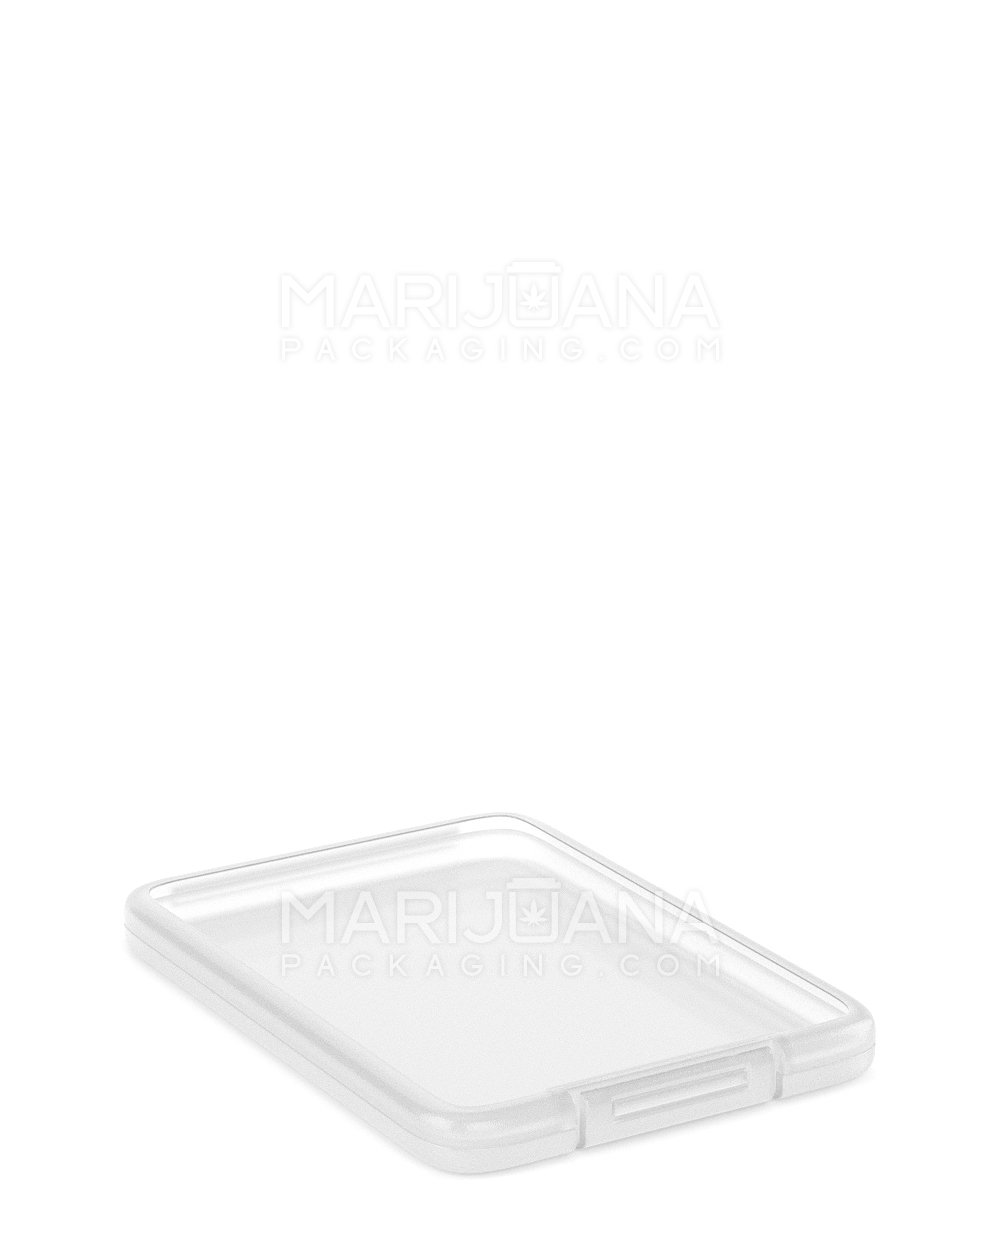 Hinged Lid Slim Shatter Container | 4.5 mm - Clear Plastic - 1000 Count - 6